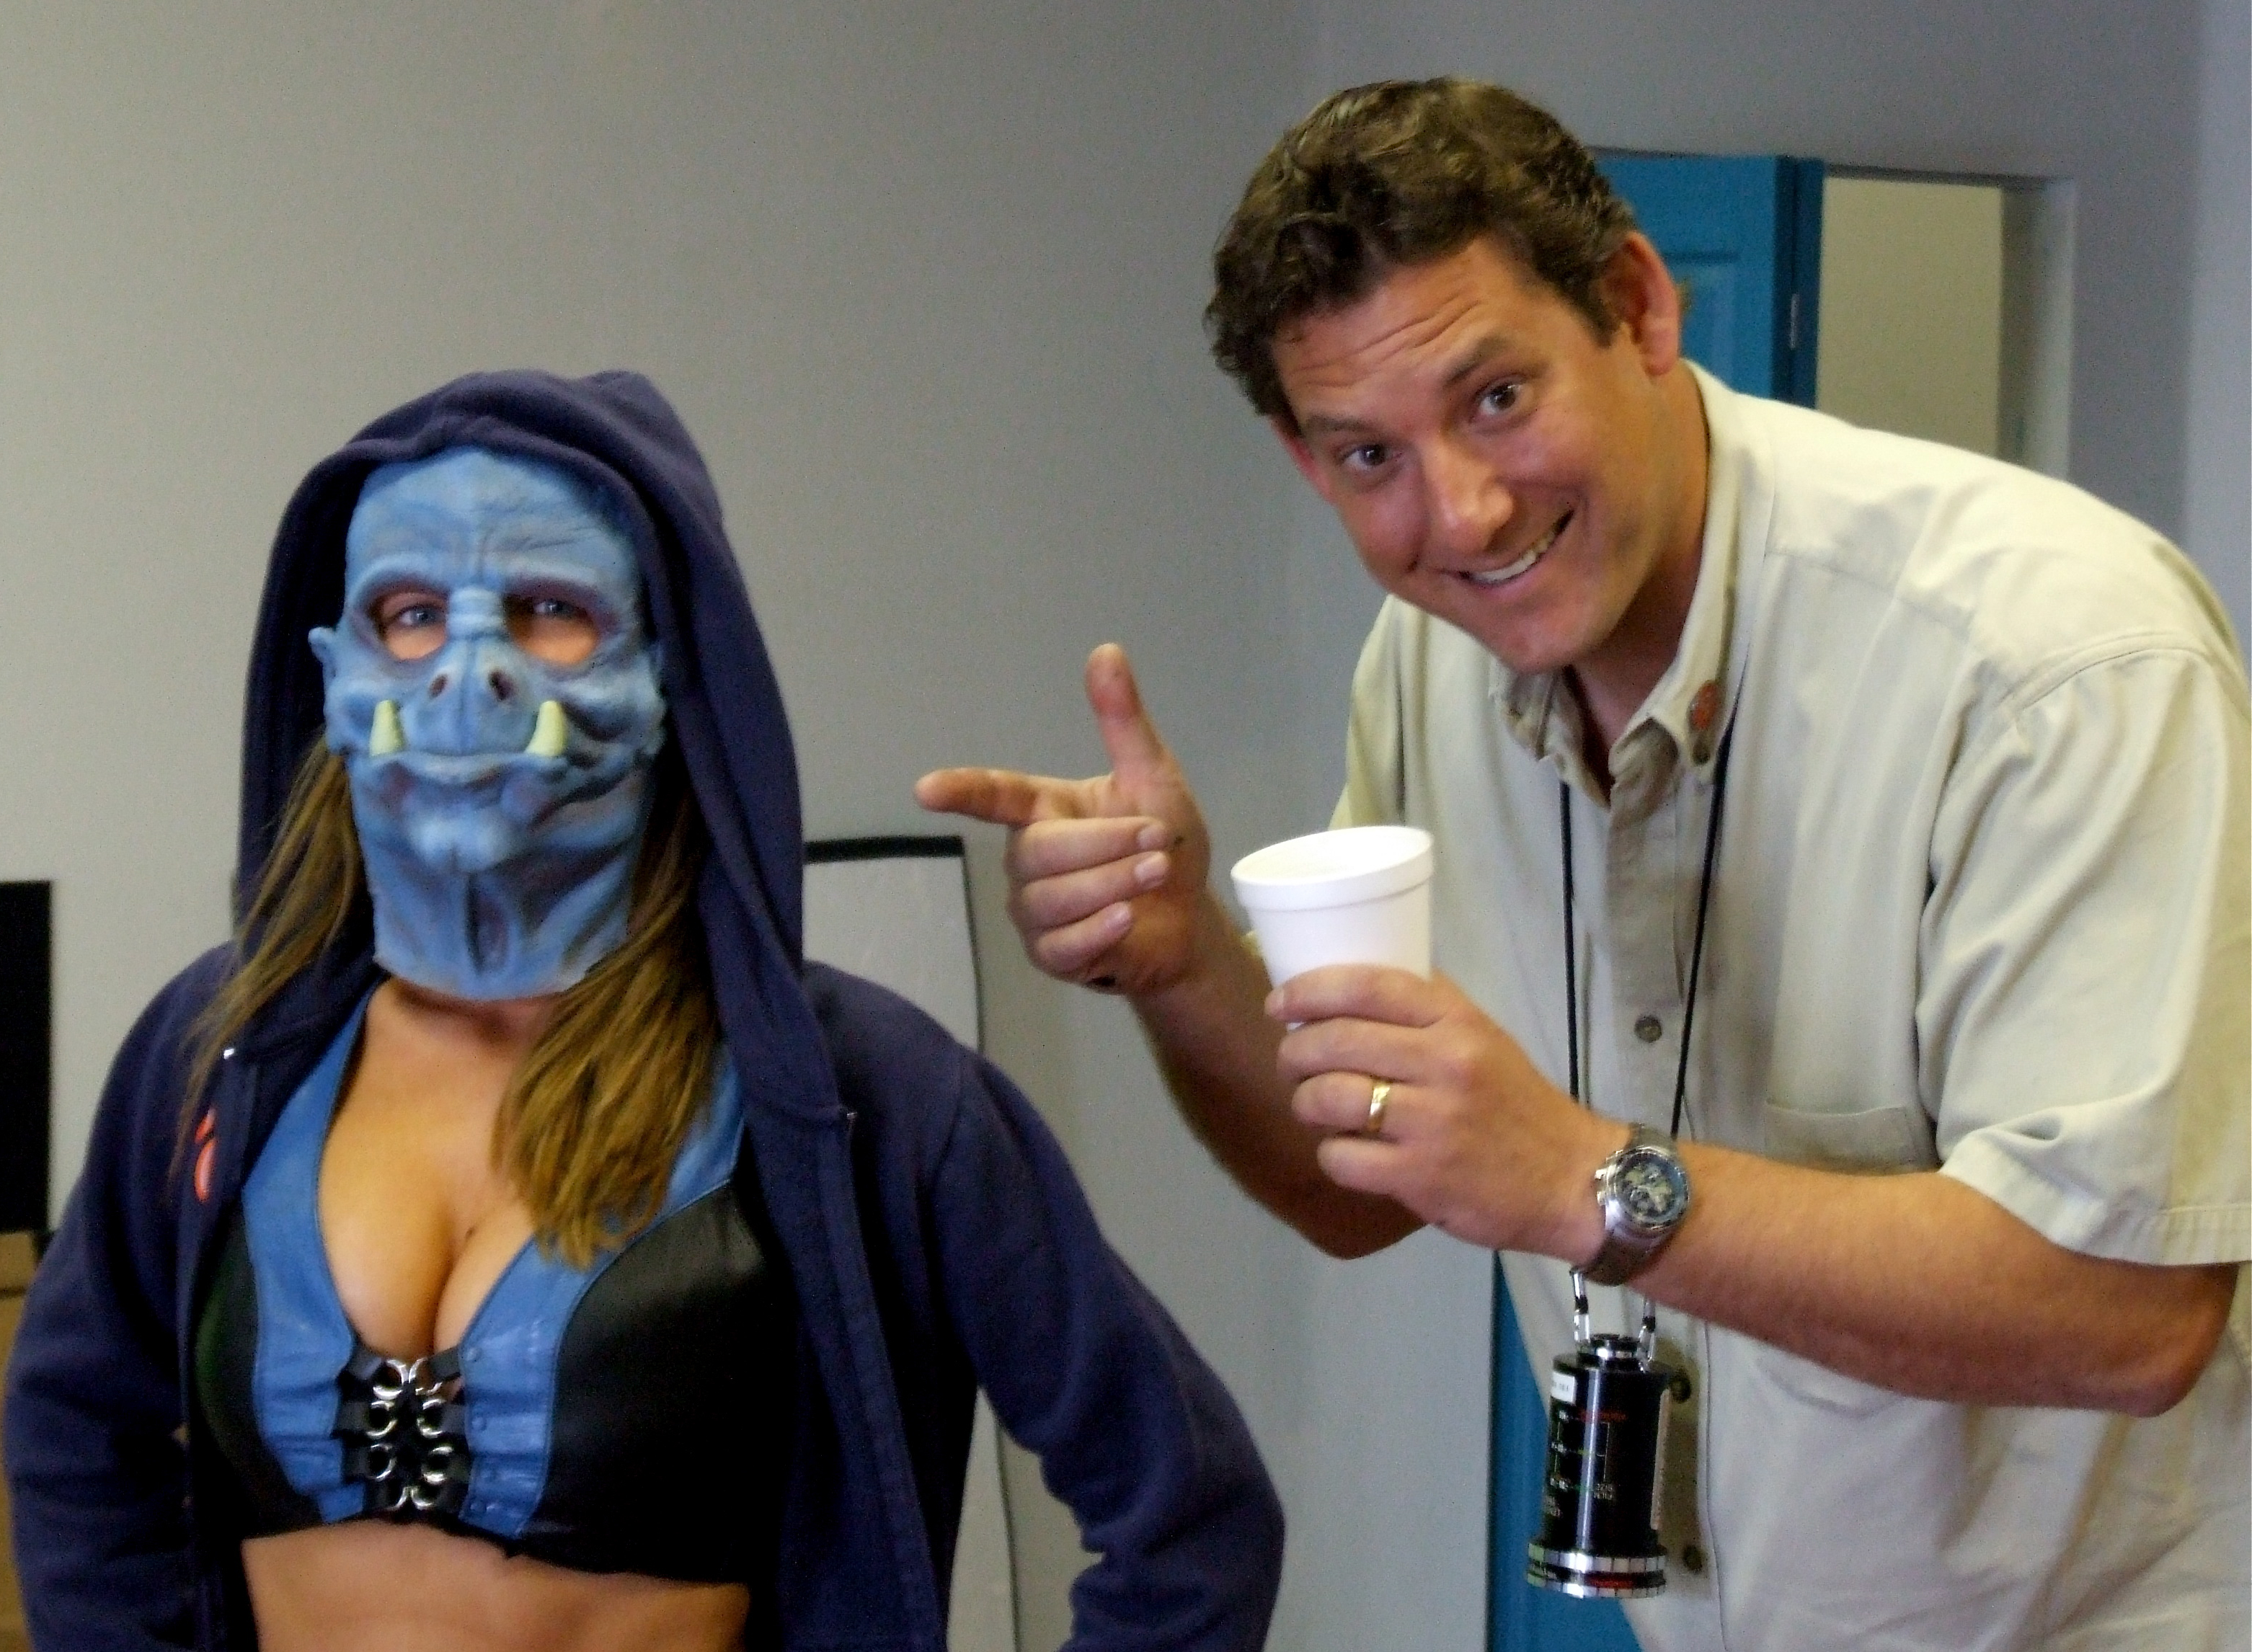 Katy O'leary and Dan Lantz goofing around on the set of 